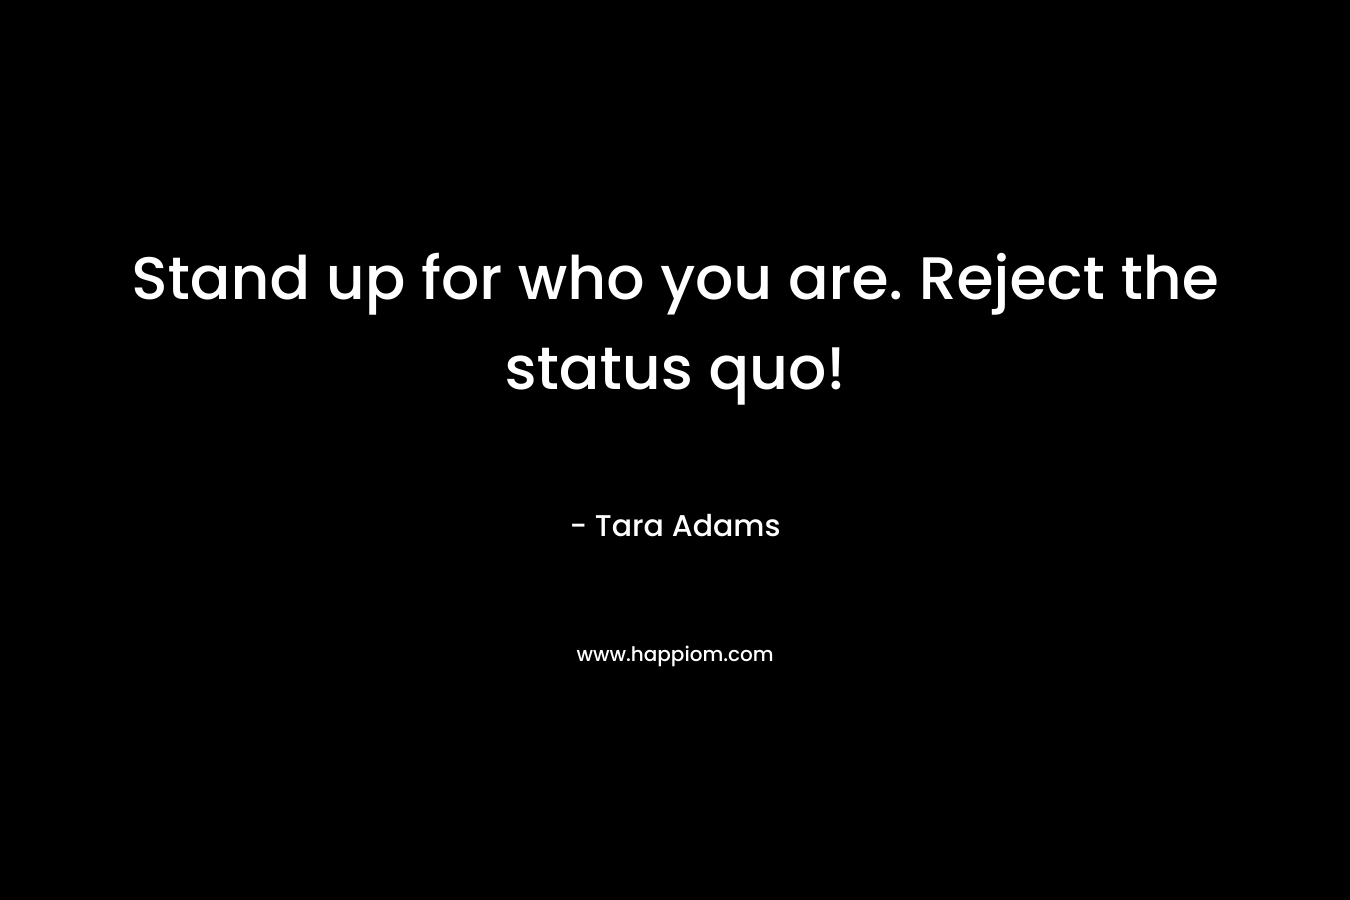 Stand up for who you are. Reject the status quo!